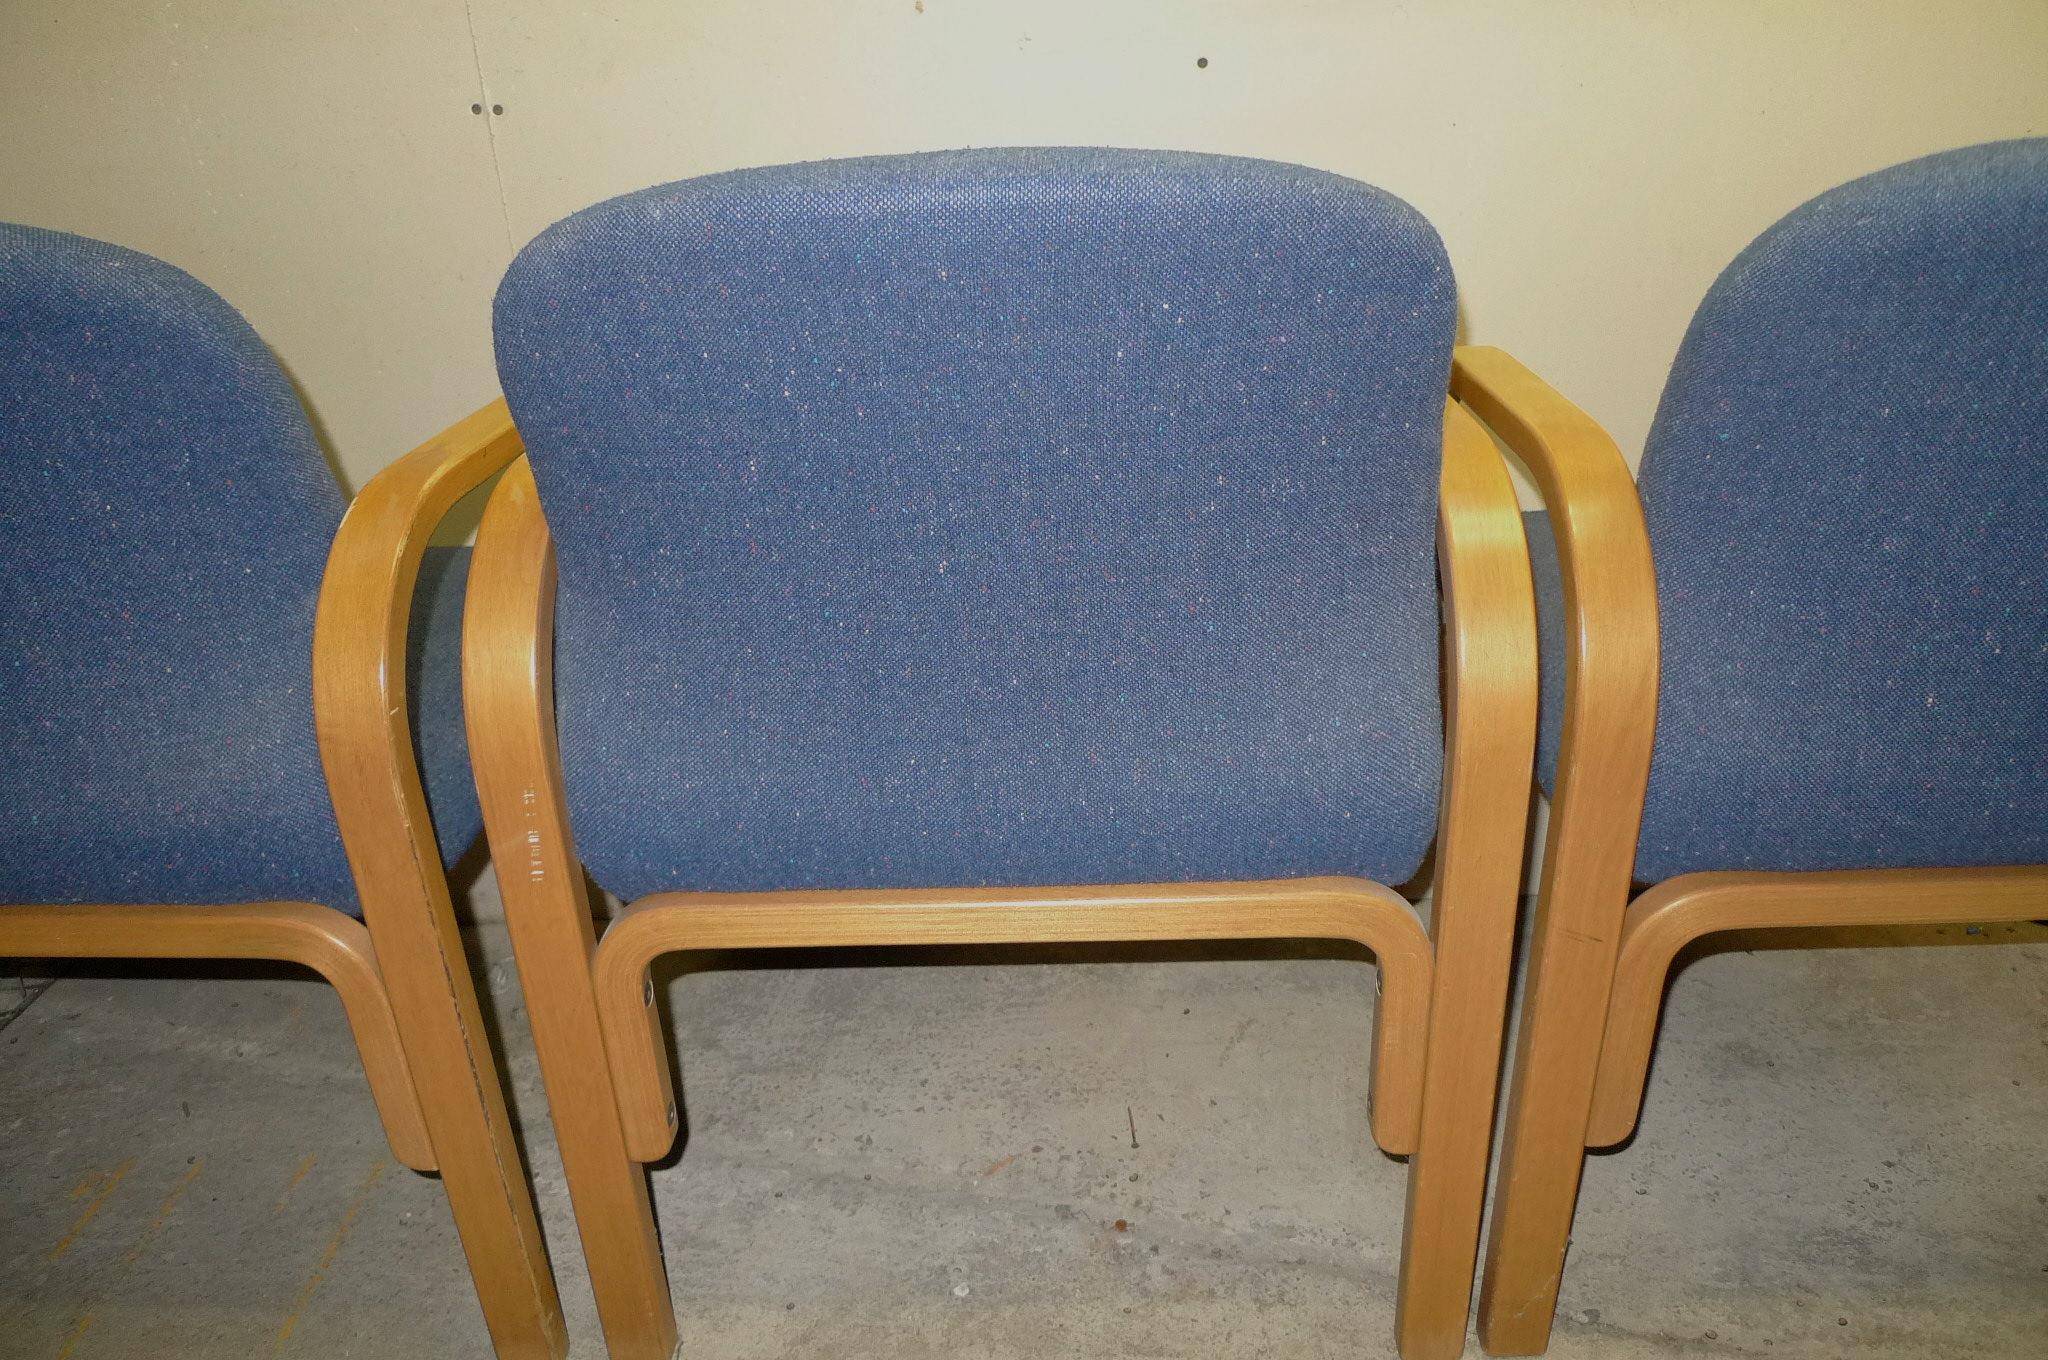 Midcentury Chairs Upholstered in Nubbly Fabric on Hardwood Frames, Set of 3 For Sale 6